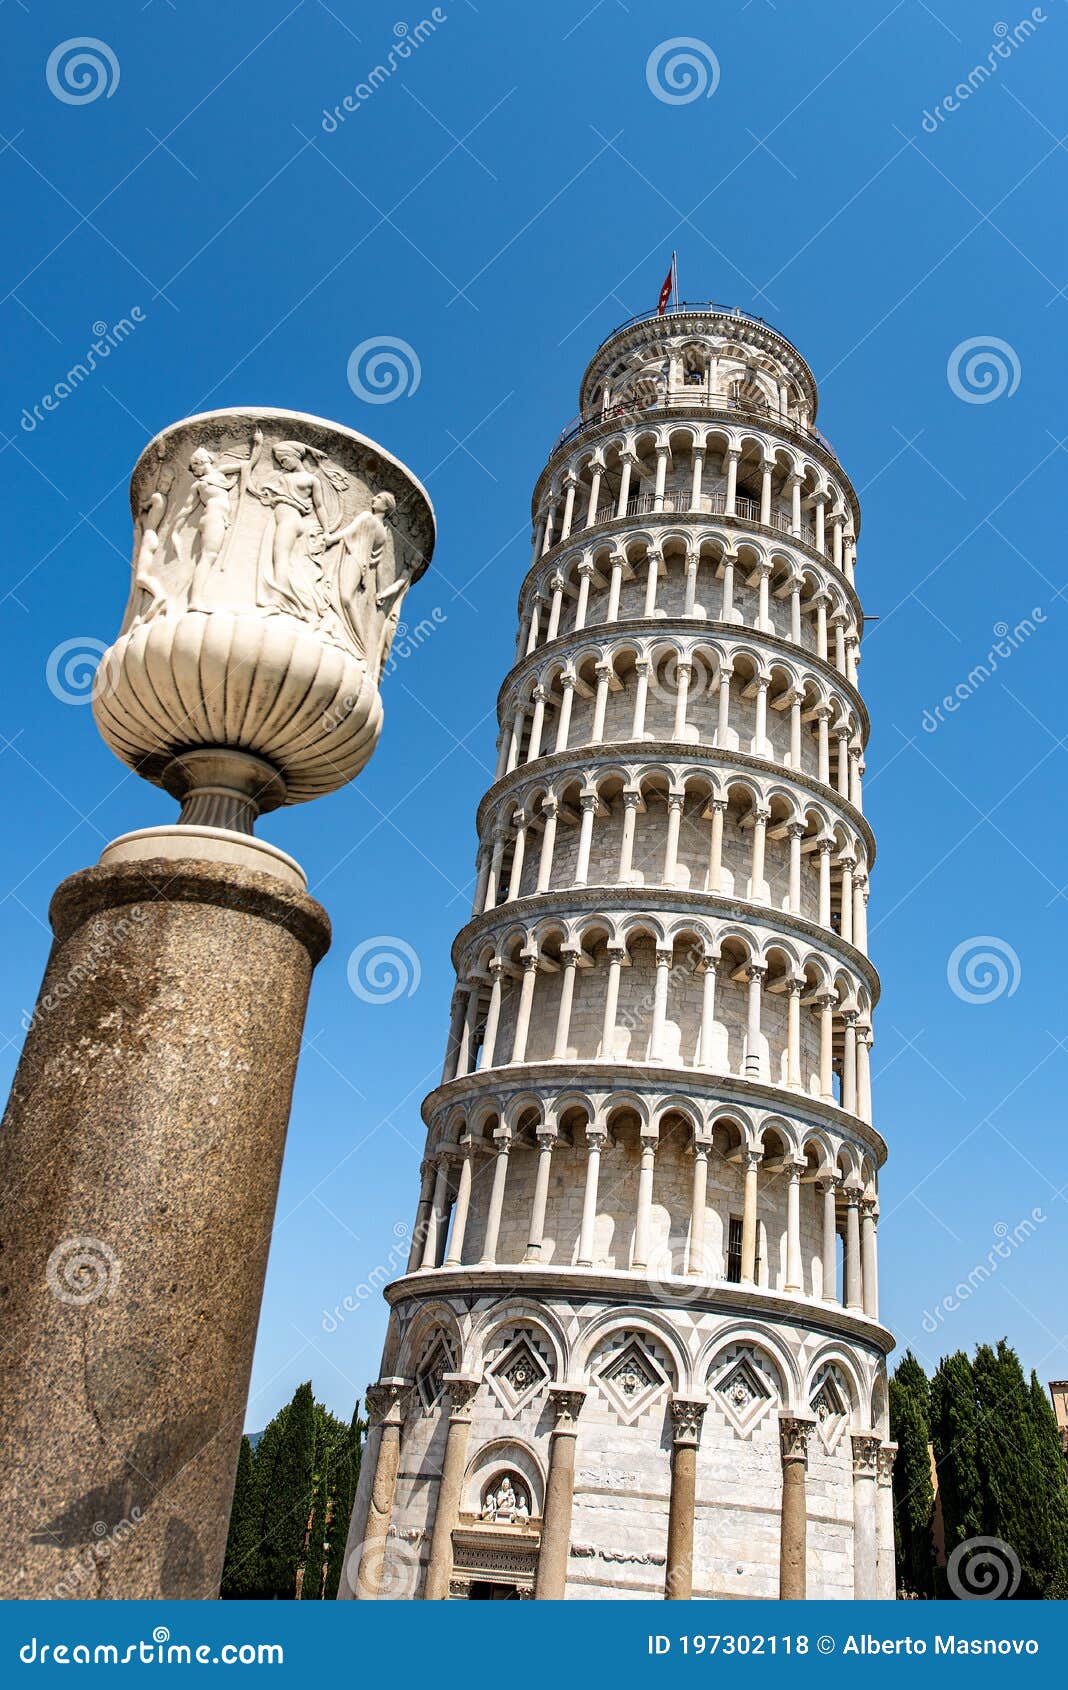 leaning tower of pisa and vase of the talent - tuscany italy